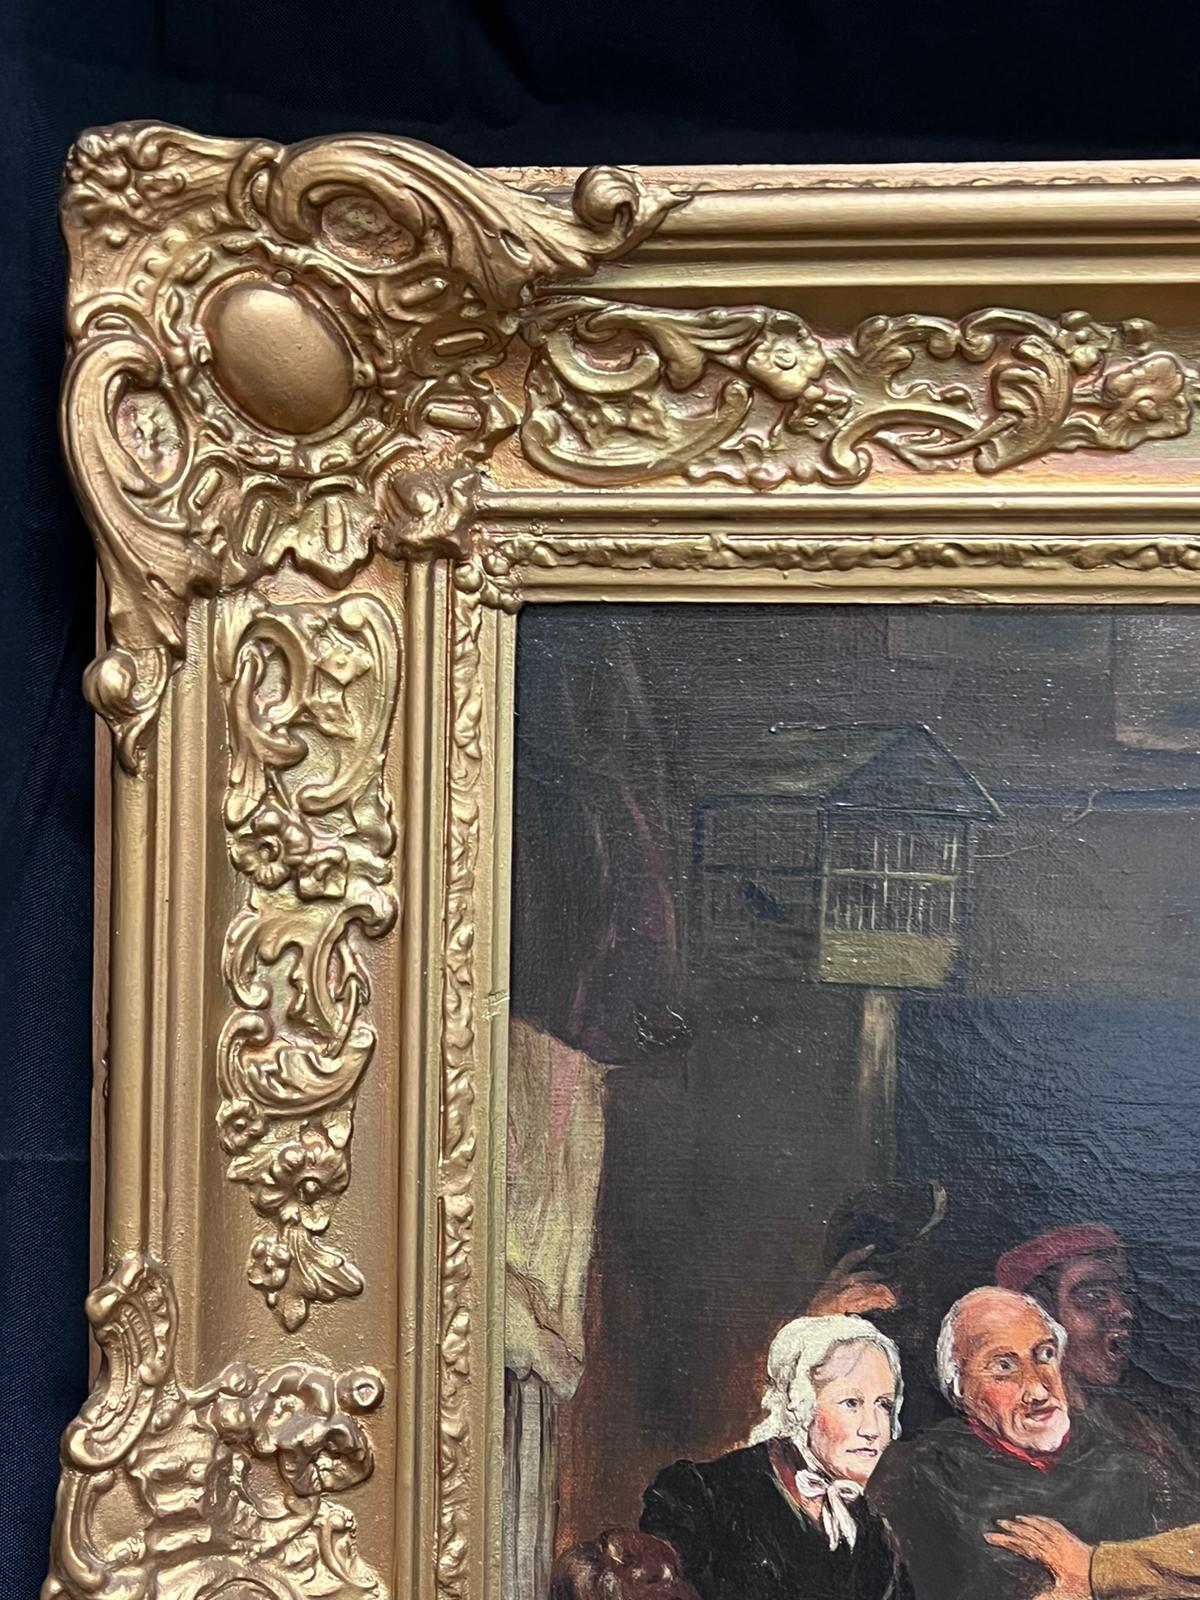 Lord Nelson
British artist, signed and dated lower corner
signed oil on canvas, framed
dated 1918
framed: 31 x 37.5 inches
canvas: 22 x 30 inches
provenance: private collection, England
condition: very good and sound condition; please note due to